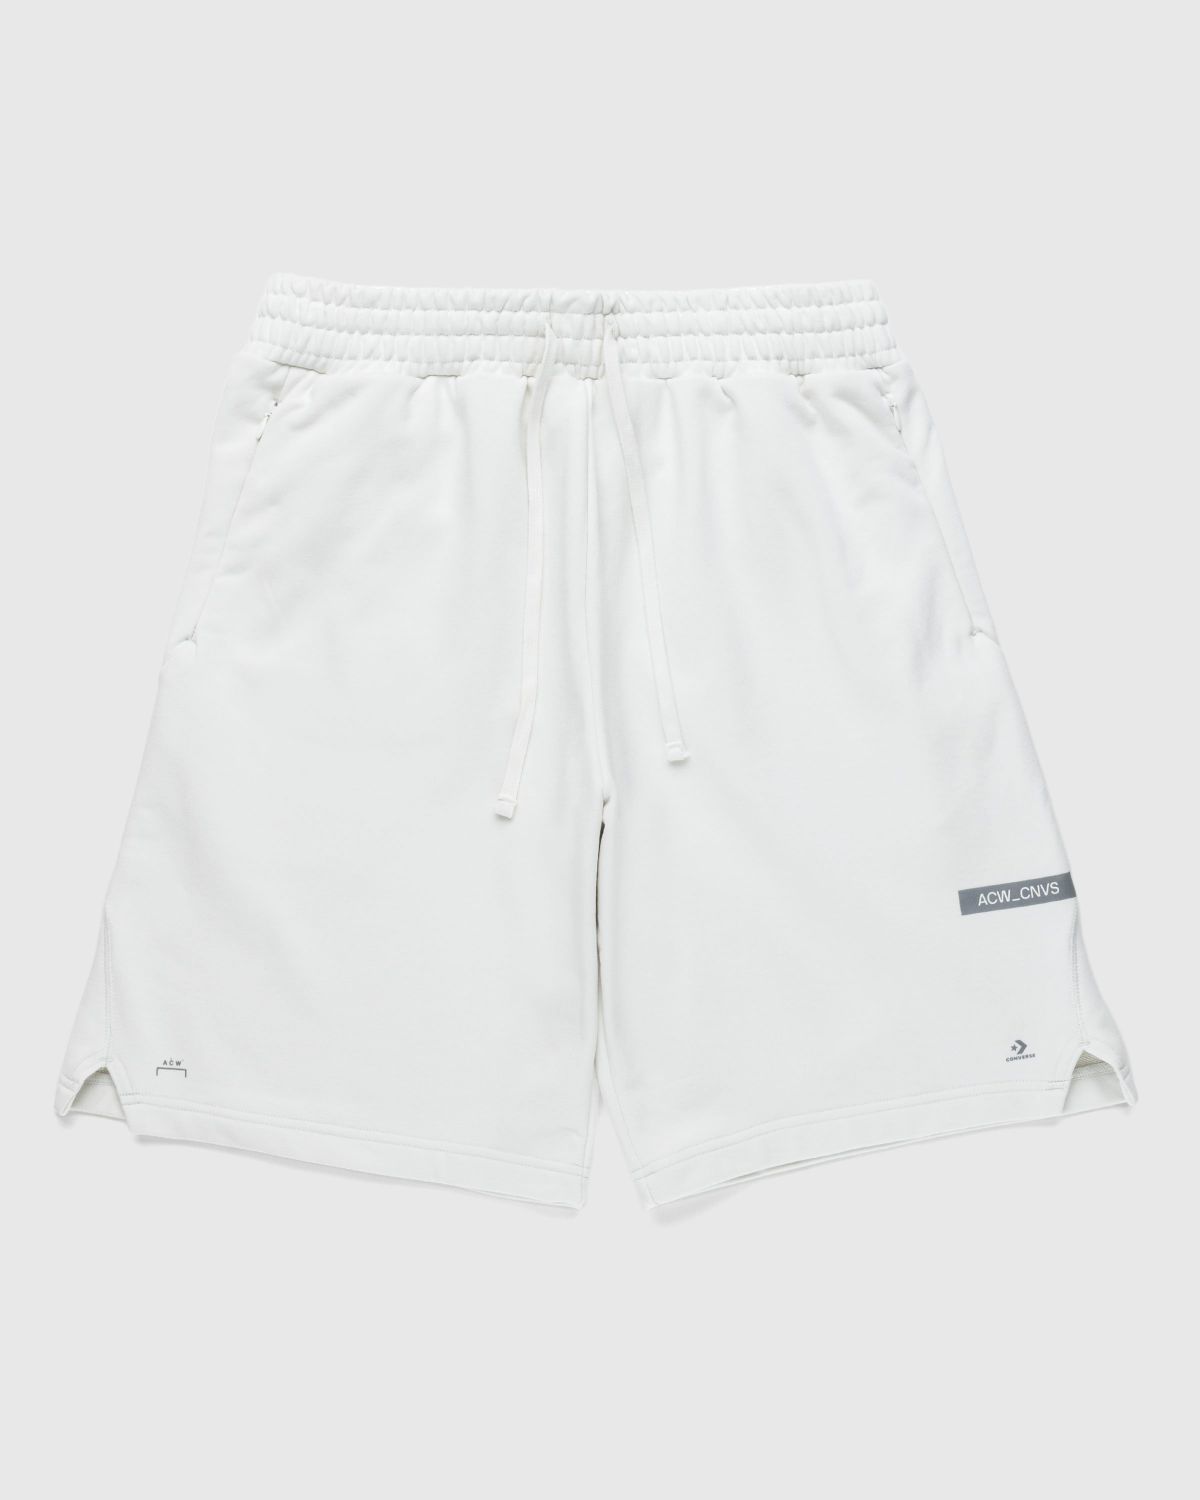 Converse x A-Cold-Wall* – Reflective Shorts Stone - Shorts - Beige - Image 1